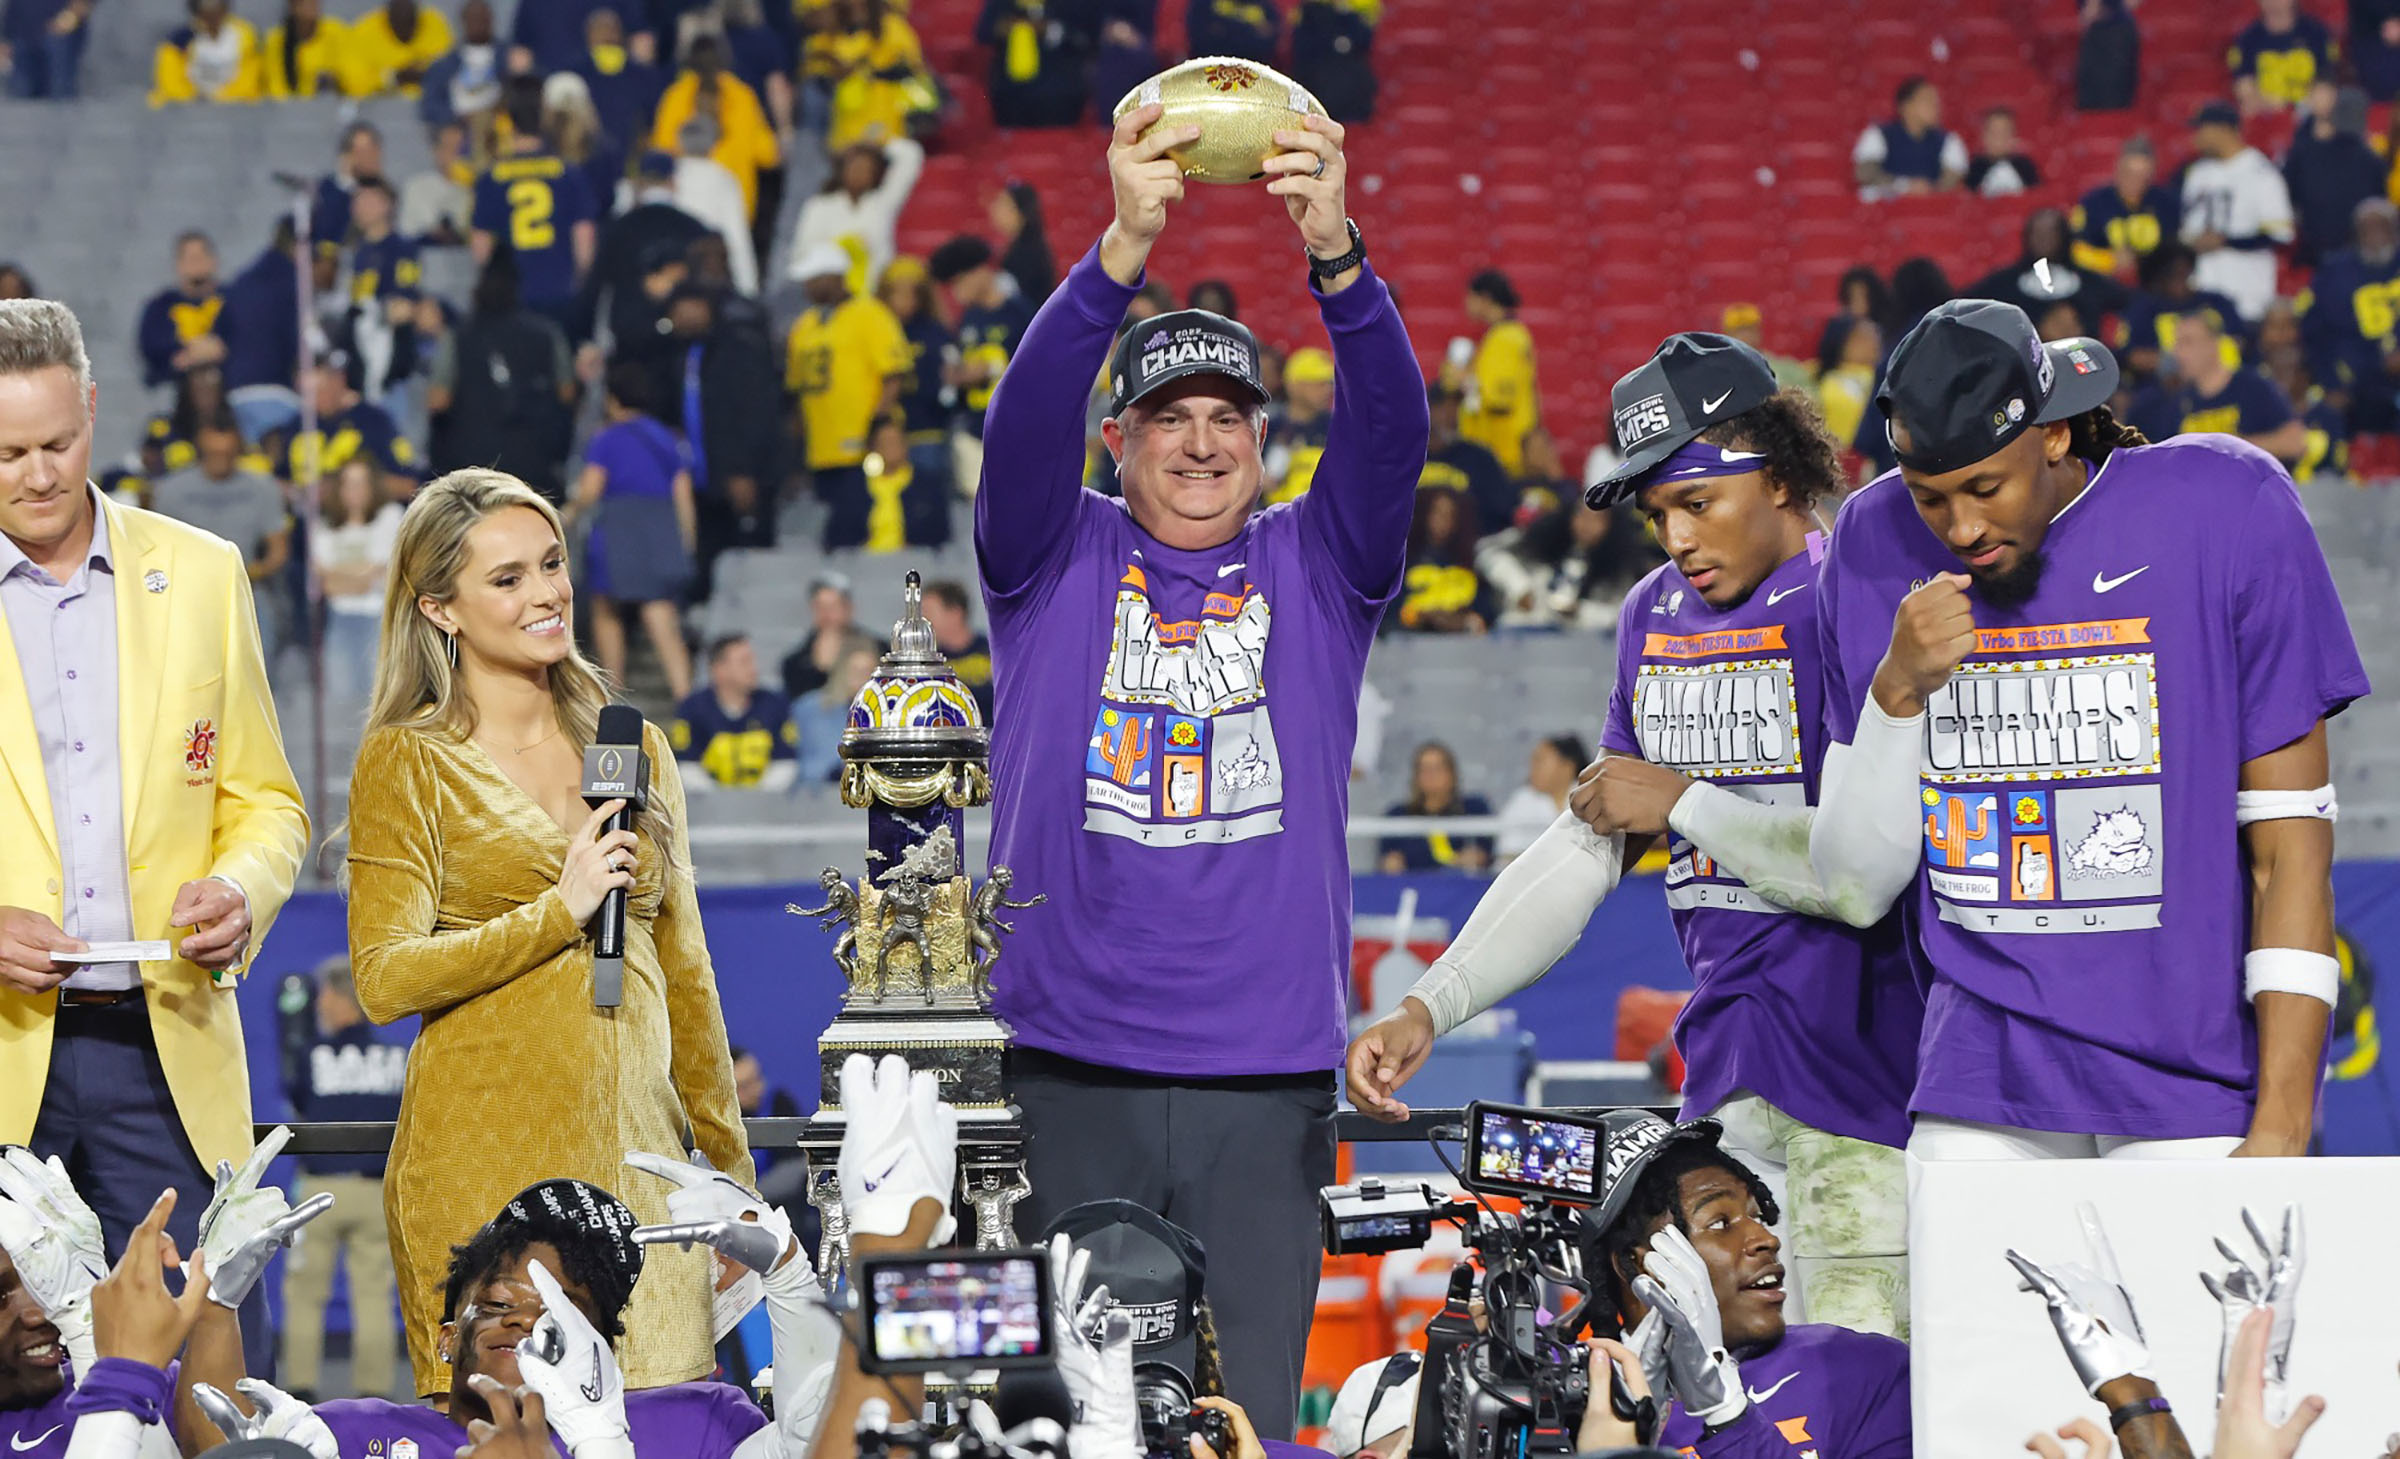 A man in a purple shirt reading "Champs" holds a golden football trophy above his head while players and spectators look on